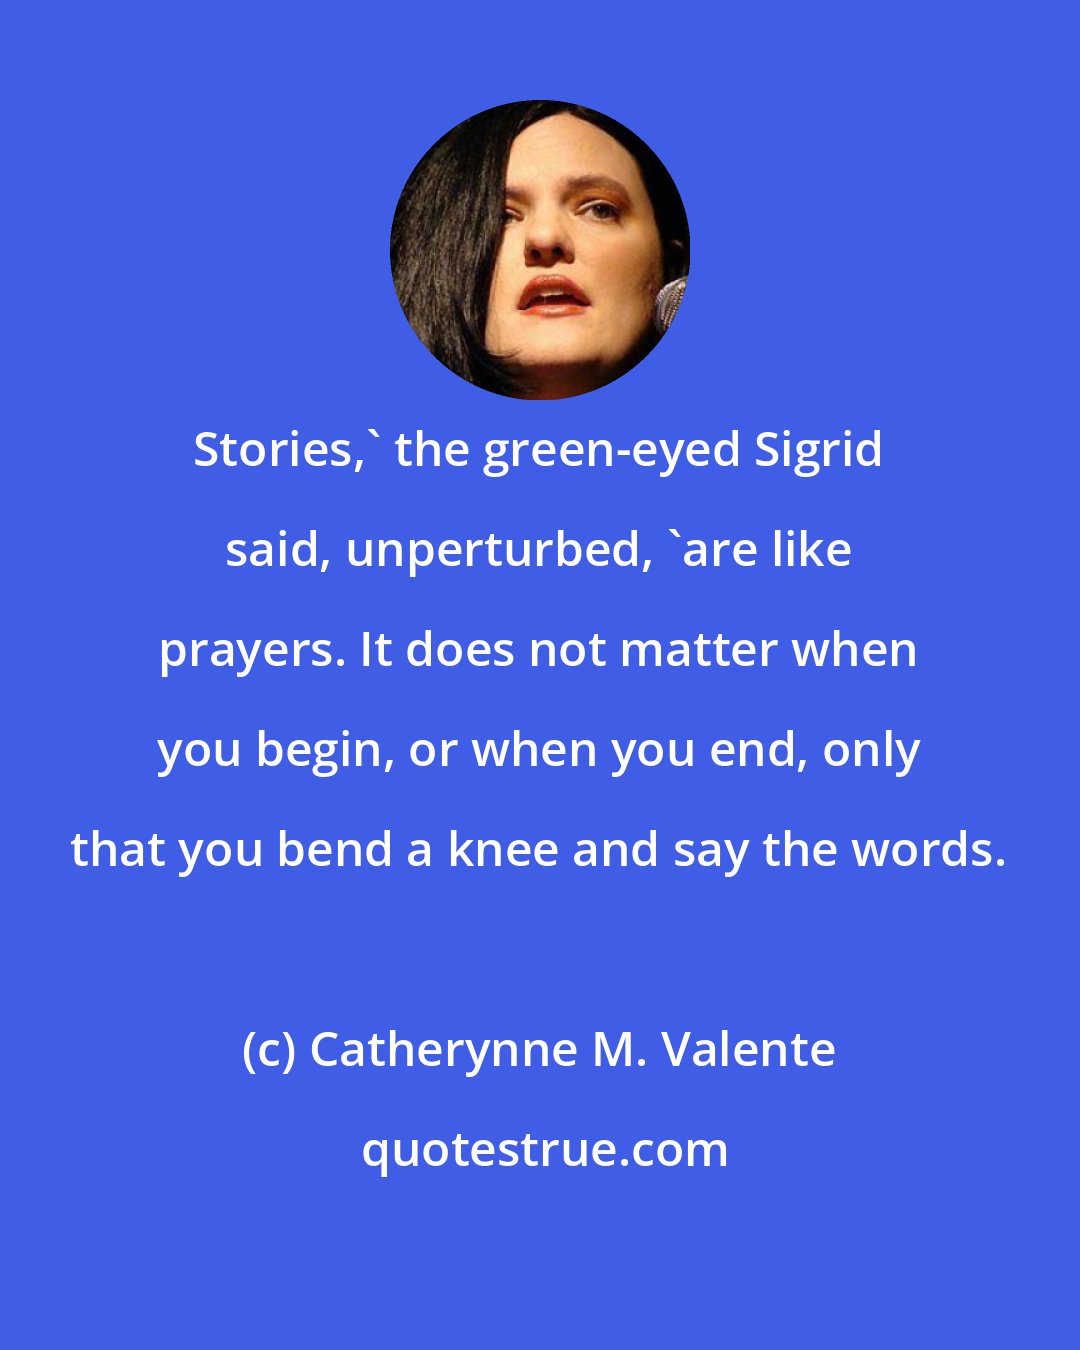 Catherynne M. Valente: Stories,' the green-eyed Sigrid said, unperturbed, 'are like prayers. It does not matter when you begin, or when you end, only that you bend a knee and say the words.